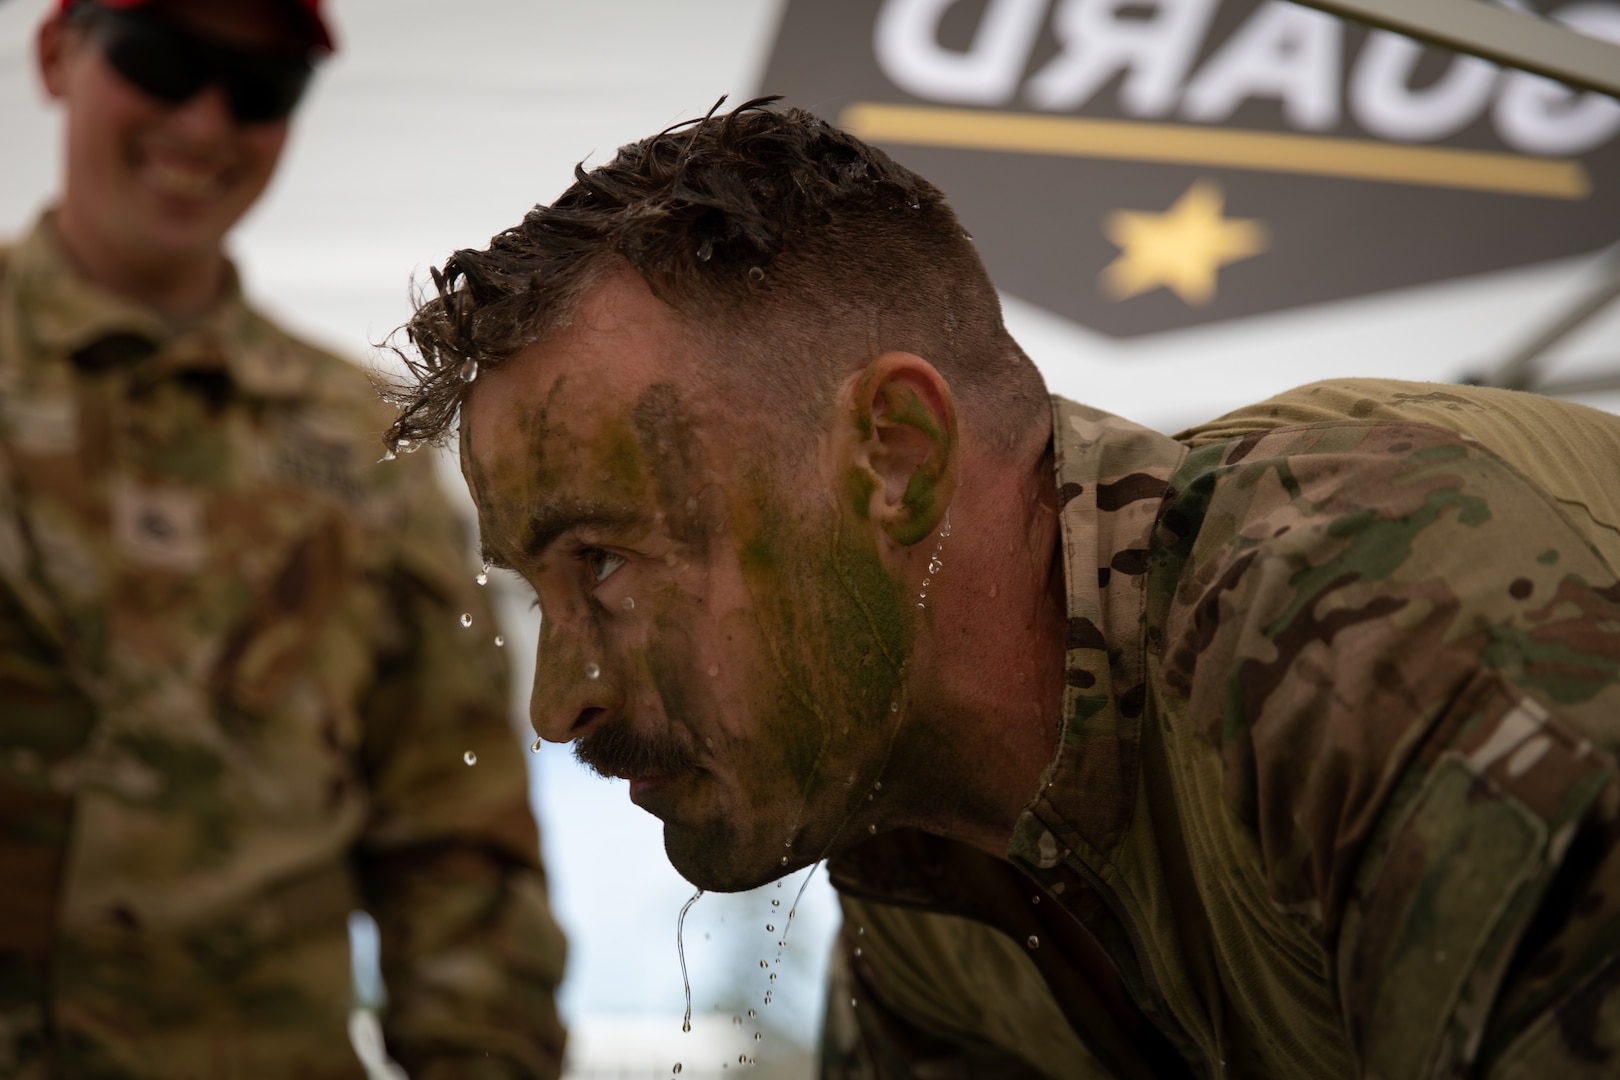 U.S. Army Sgt. Nicolas White, an indirect fire infantryman representing the Georgia Army National Guard, splashes water on his face after completing the confidence course during the Region III National Guard Best Warrior Competition at Fort Stewart, Ga., April 17, 2023. The competition tested the adaptiveness and lethality of our forces.